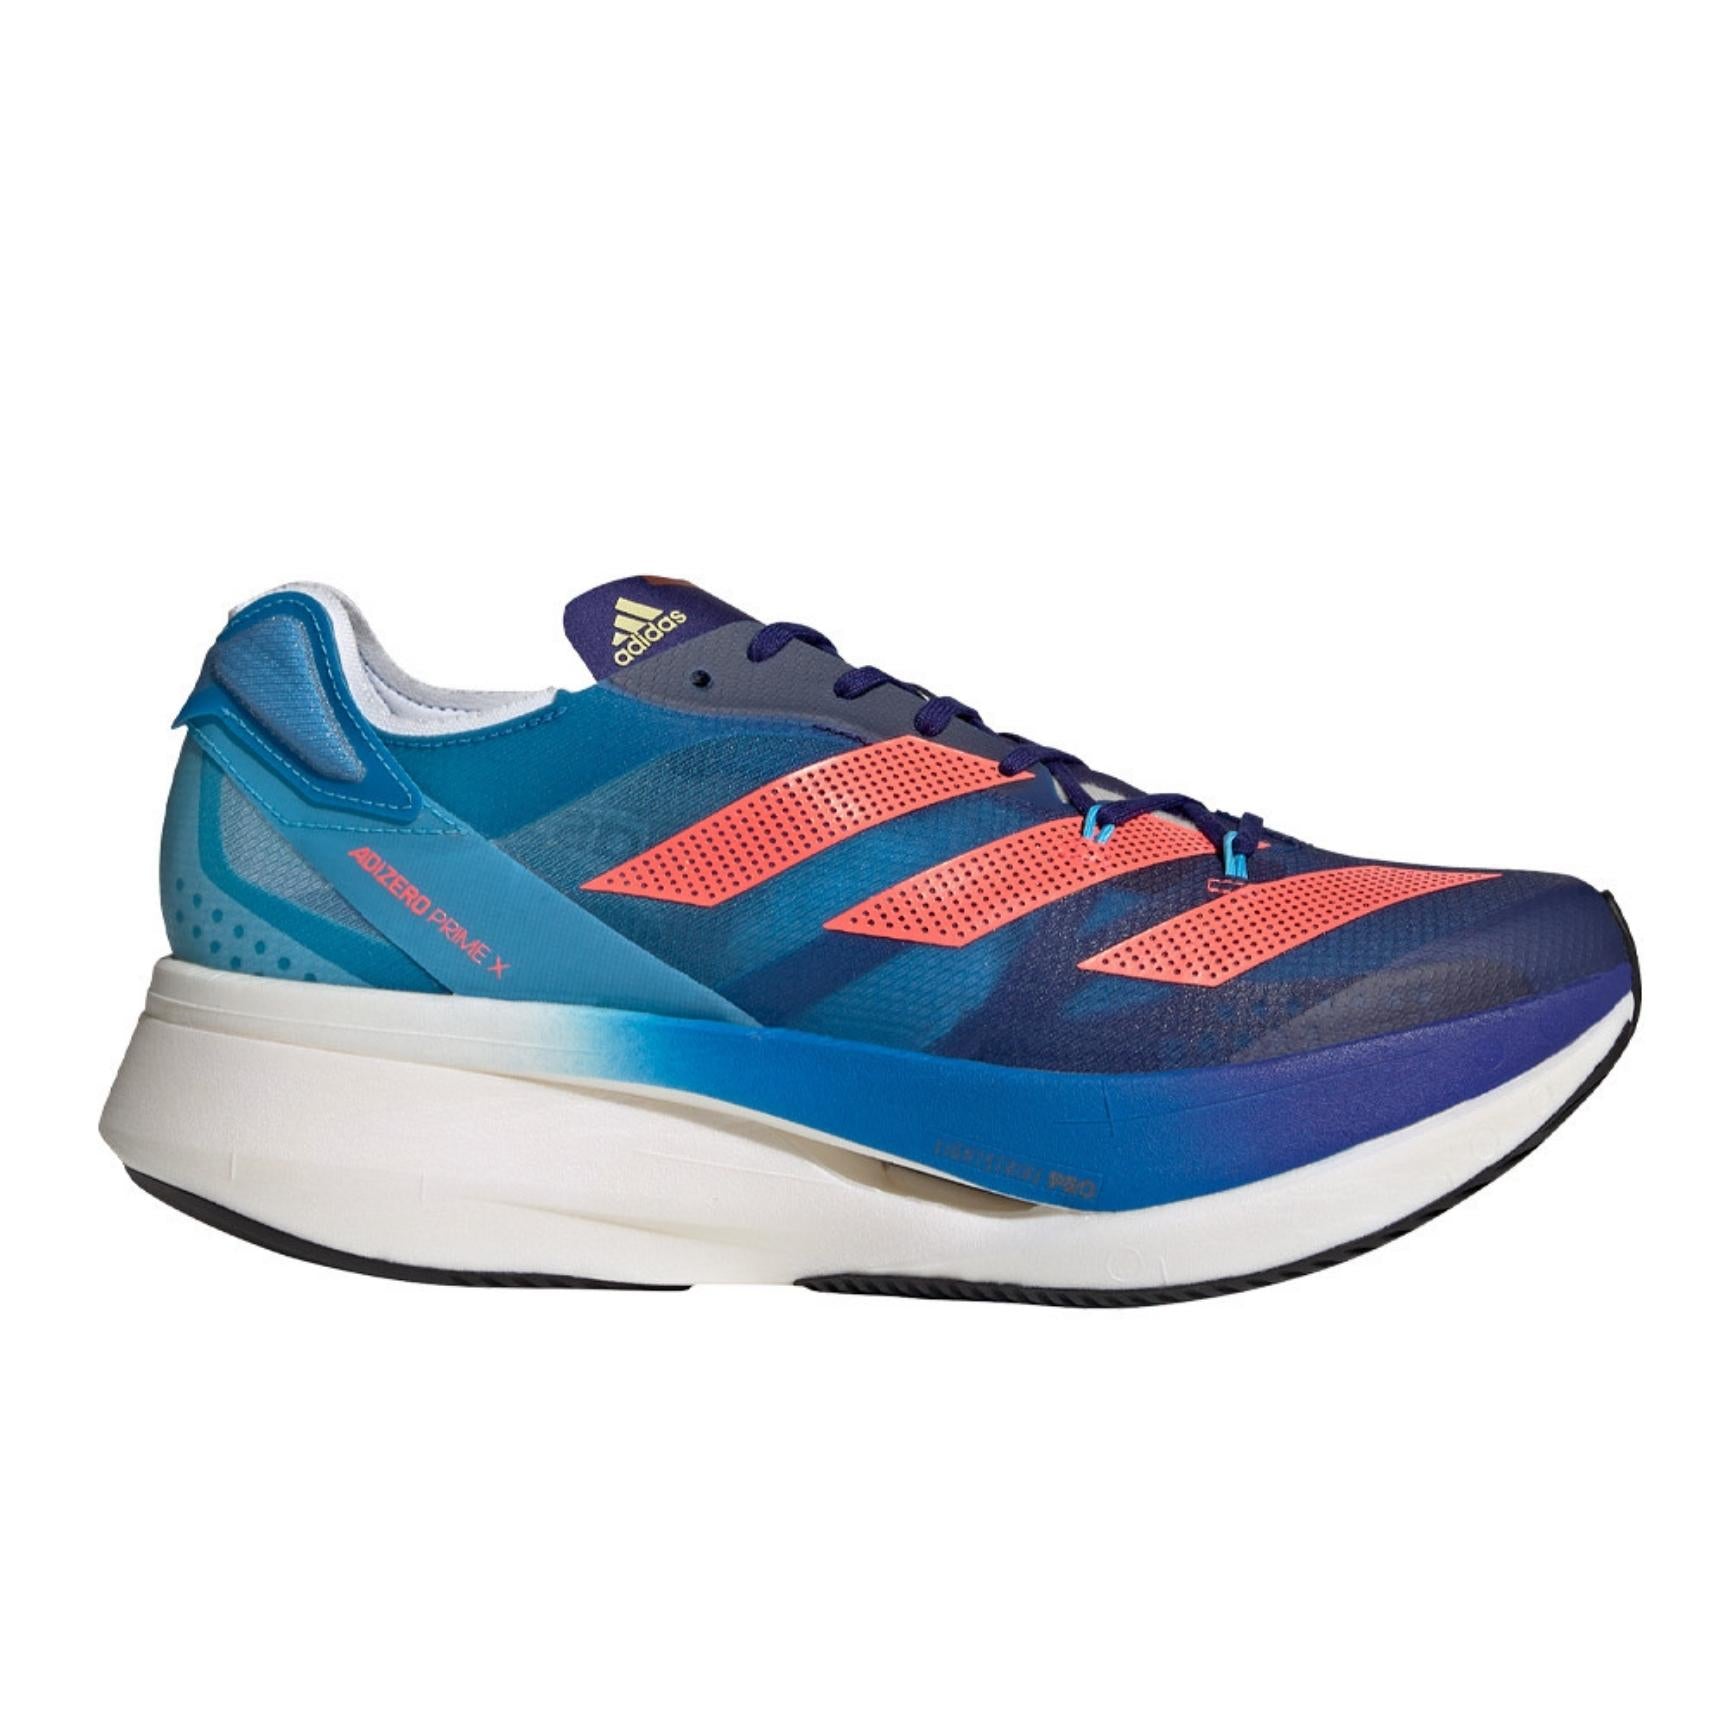 Adidas Adizero Prime Review Weight, Drop & Where To Buy – Running.Reviews